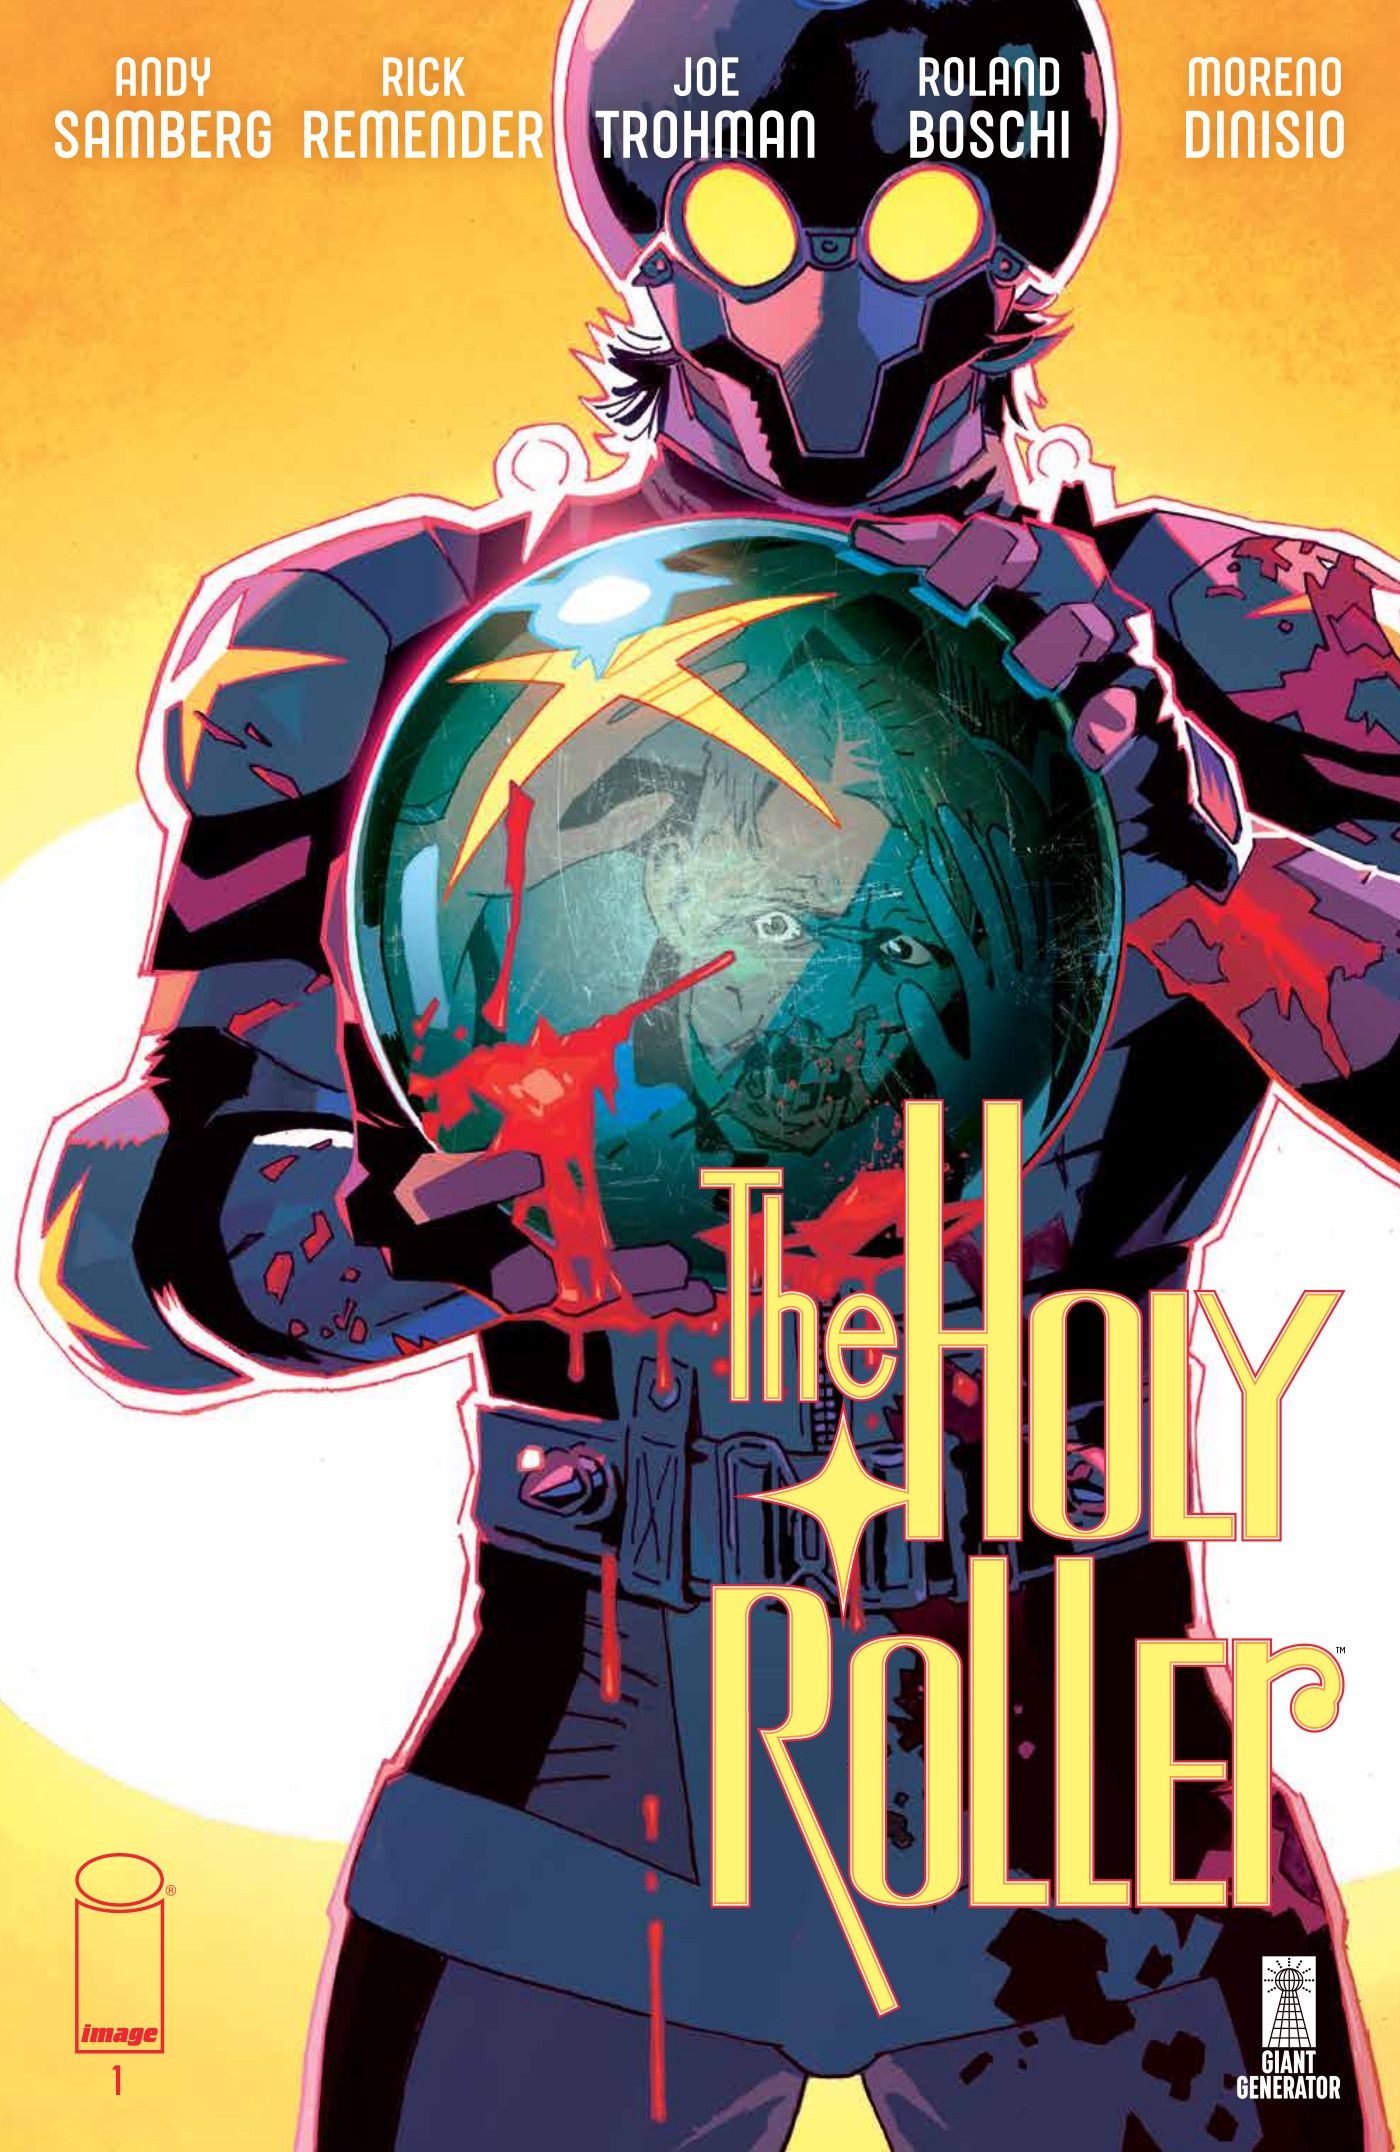 The Holy Roller #1 ACover by Roland Boschi.